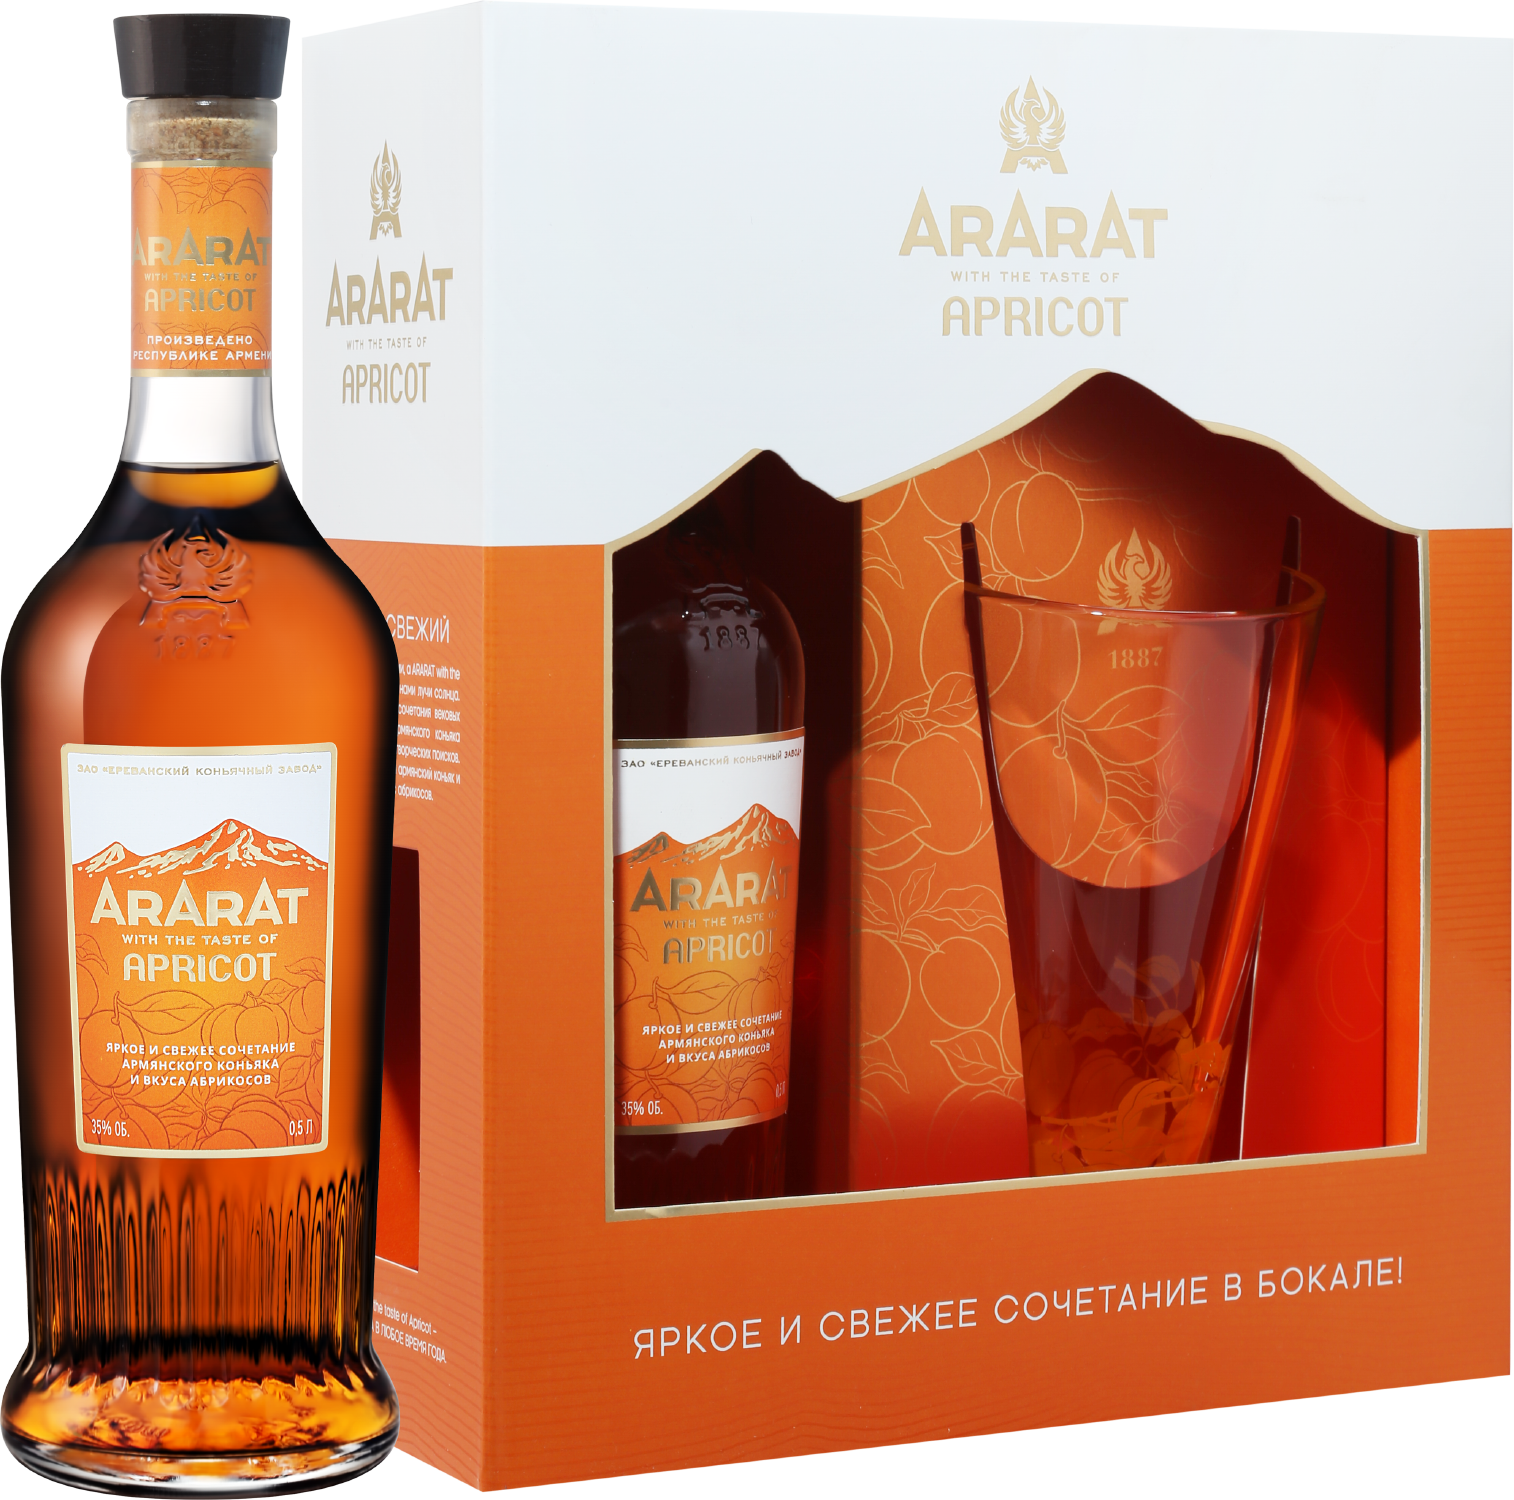 ARARAT Apricot (gift box with a glass) aperol gift box with a glass